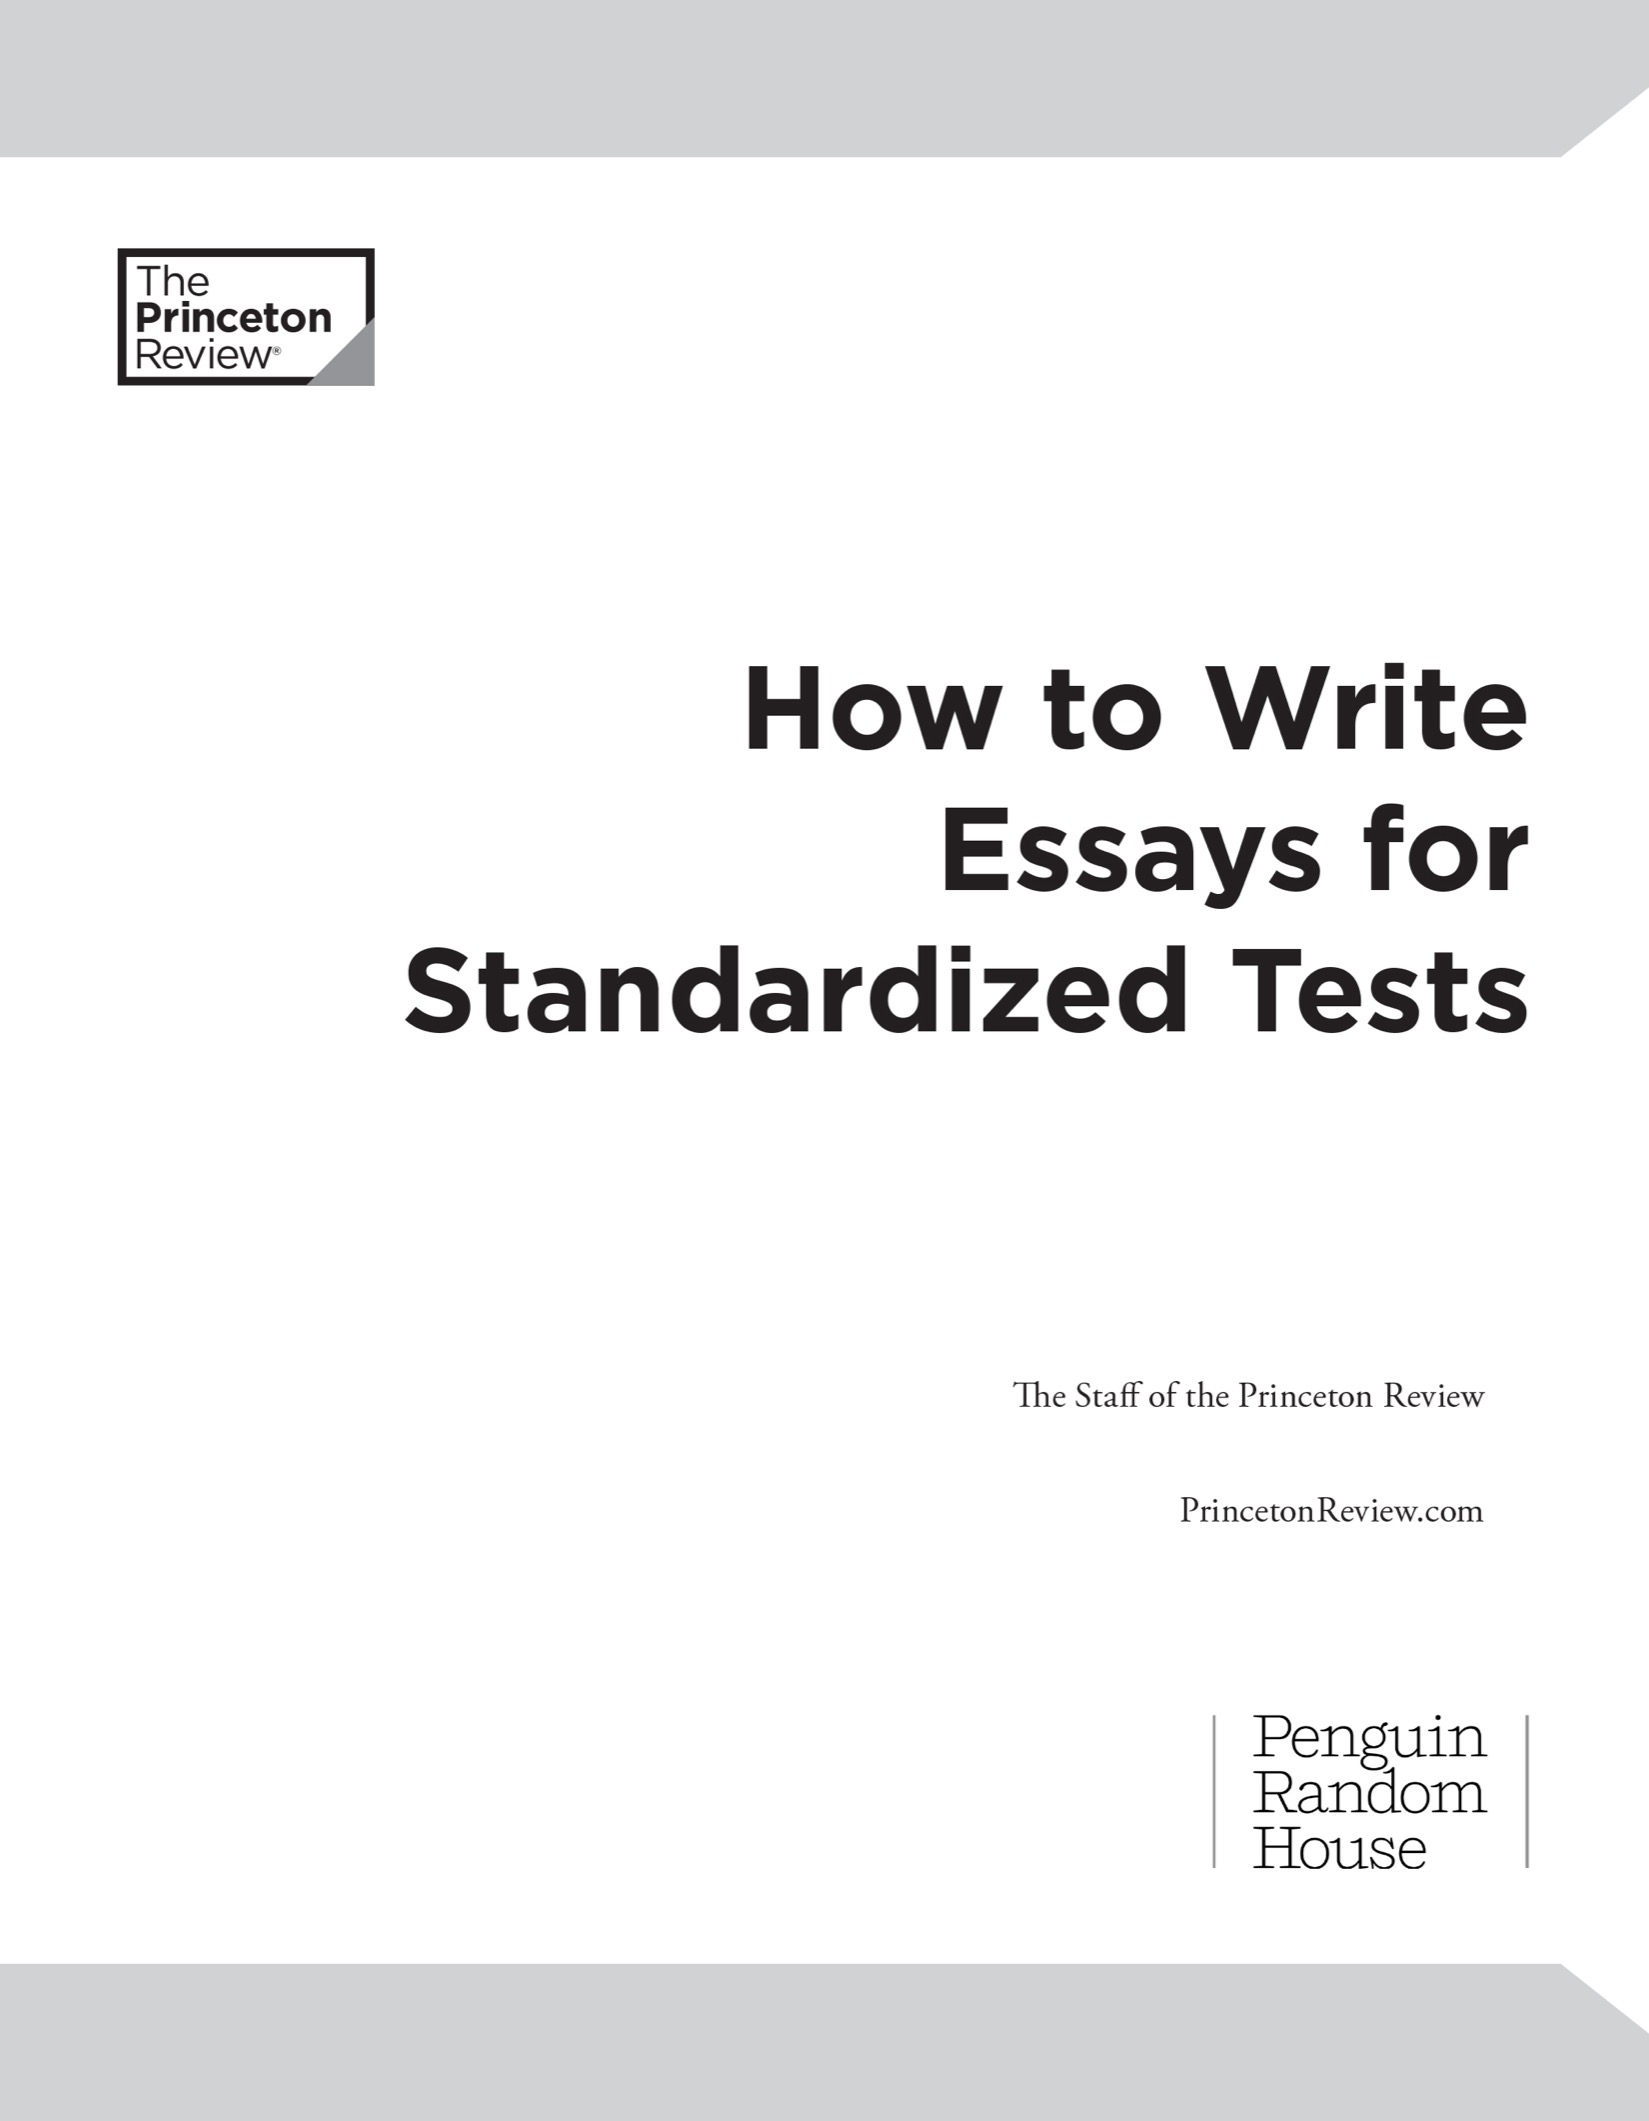 Book title, How to Write Essays for Standardized Tests, subtitle, Advice and Examples for AP, ACT, and Other Common High School Exam Essays, author, The Princeton Review, imprint, Princeton Review